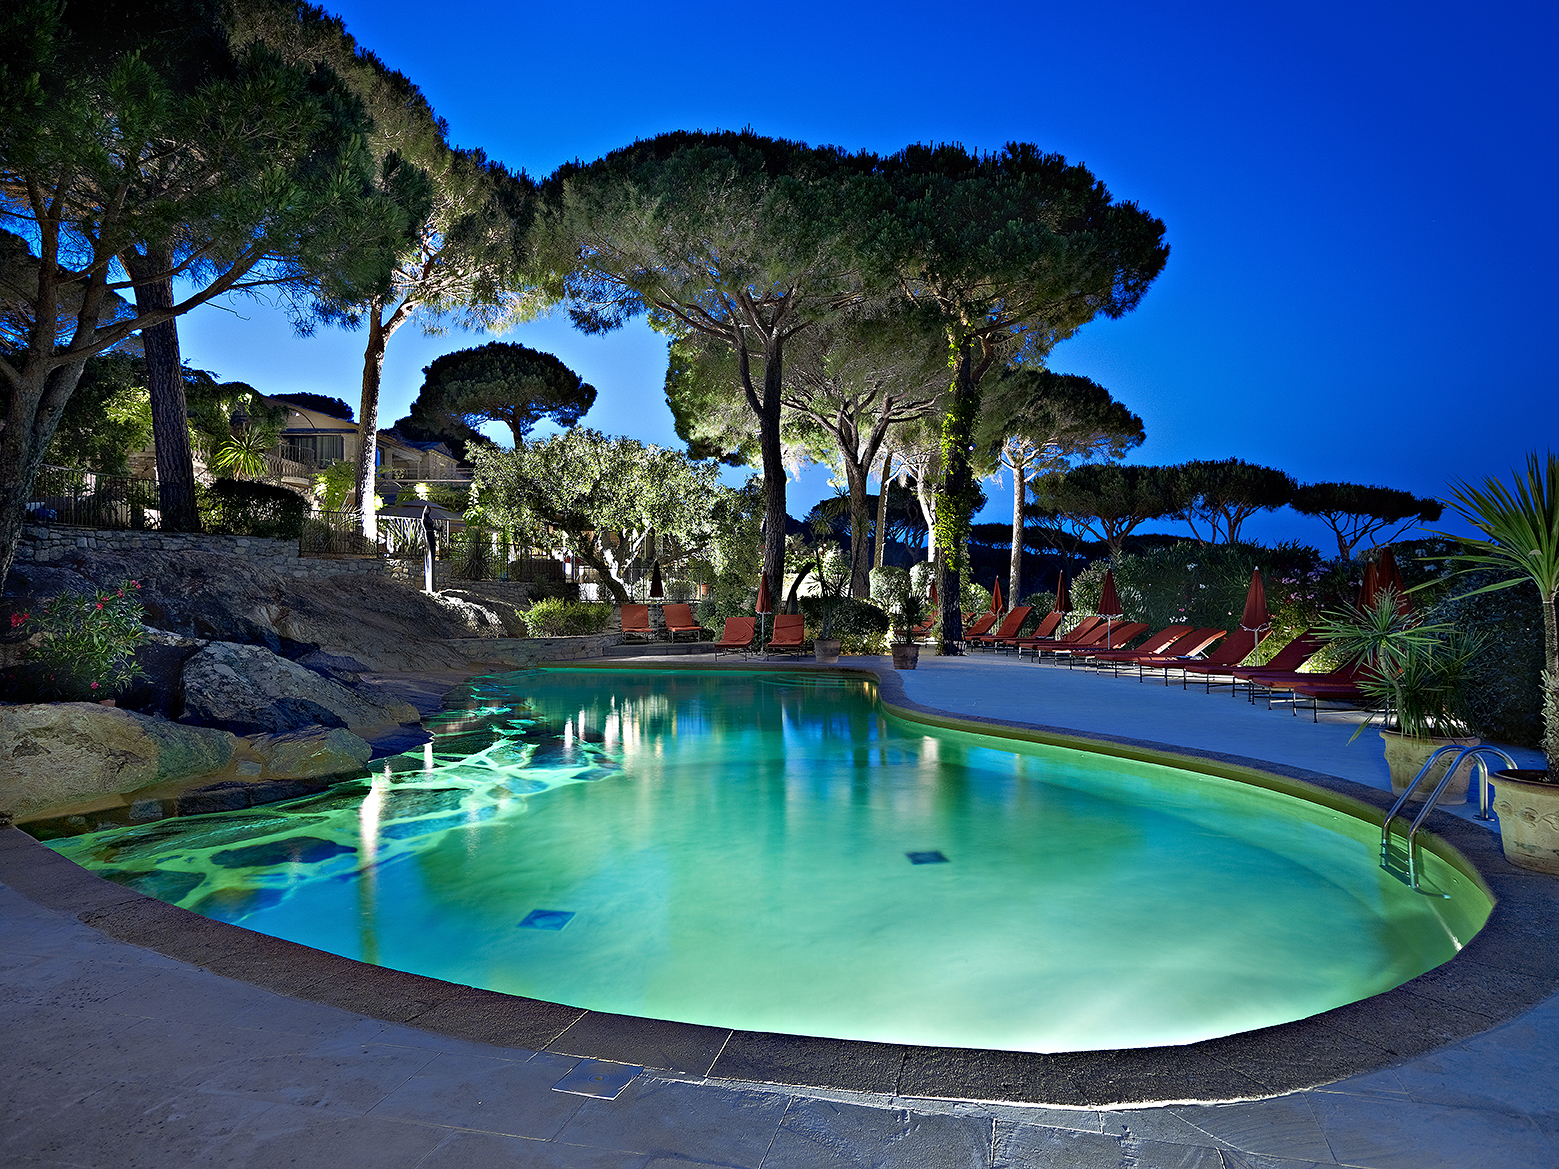 Outdoor swimming pool of Villa Marie, France